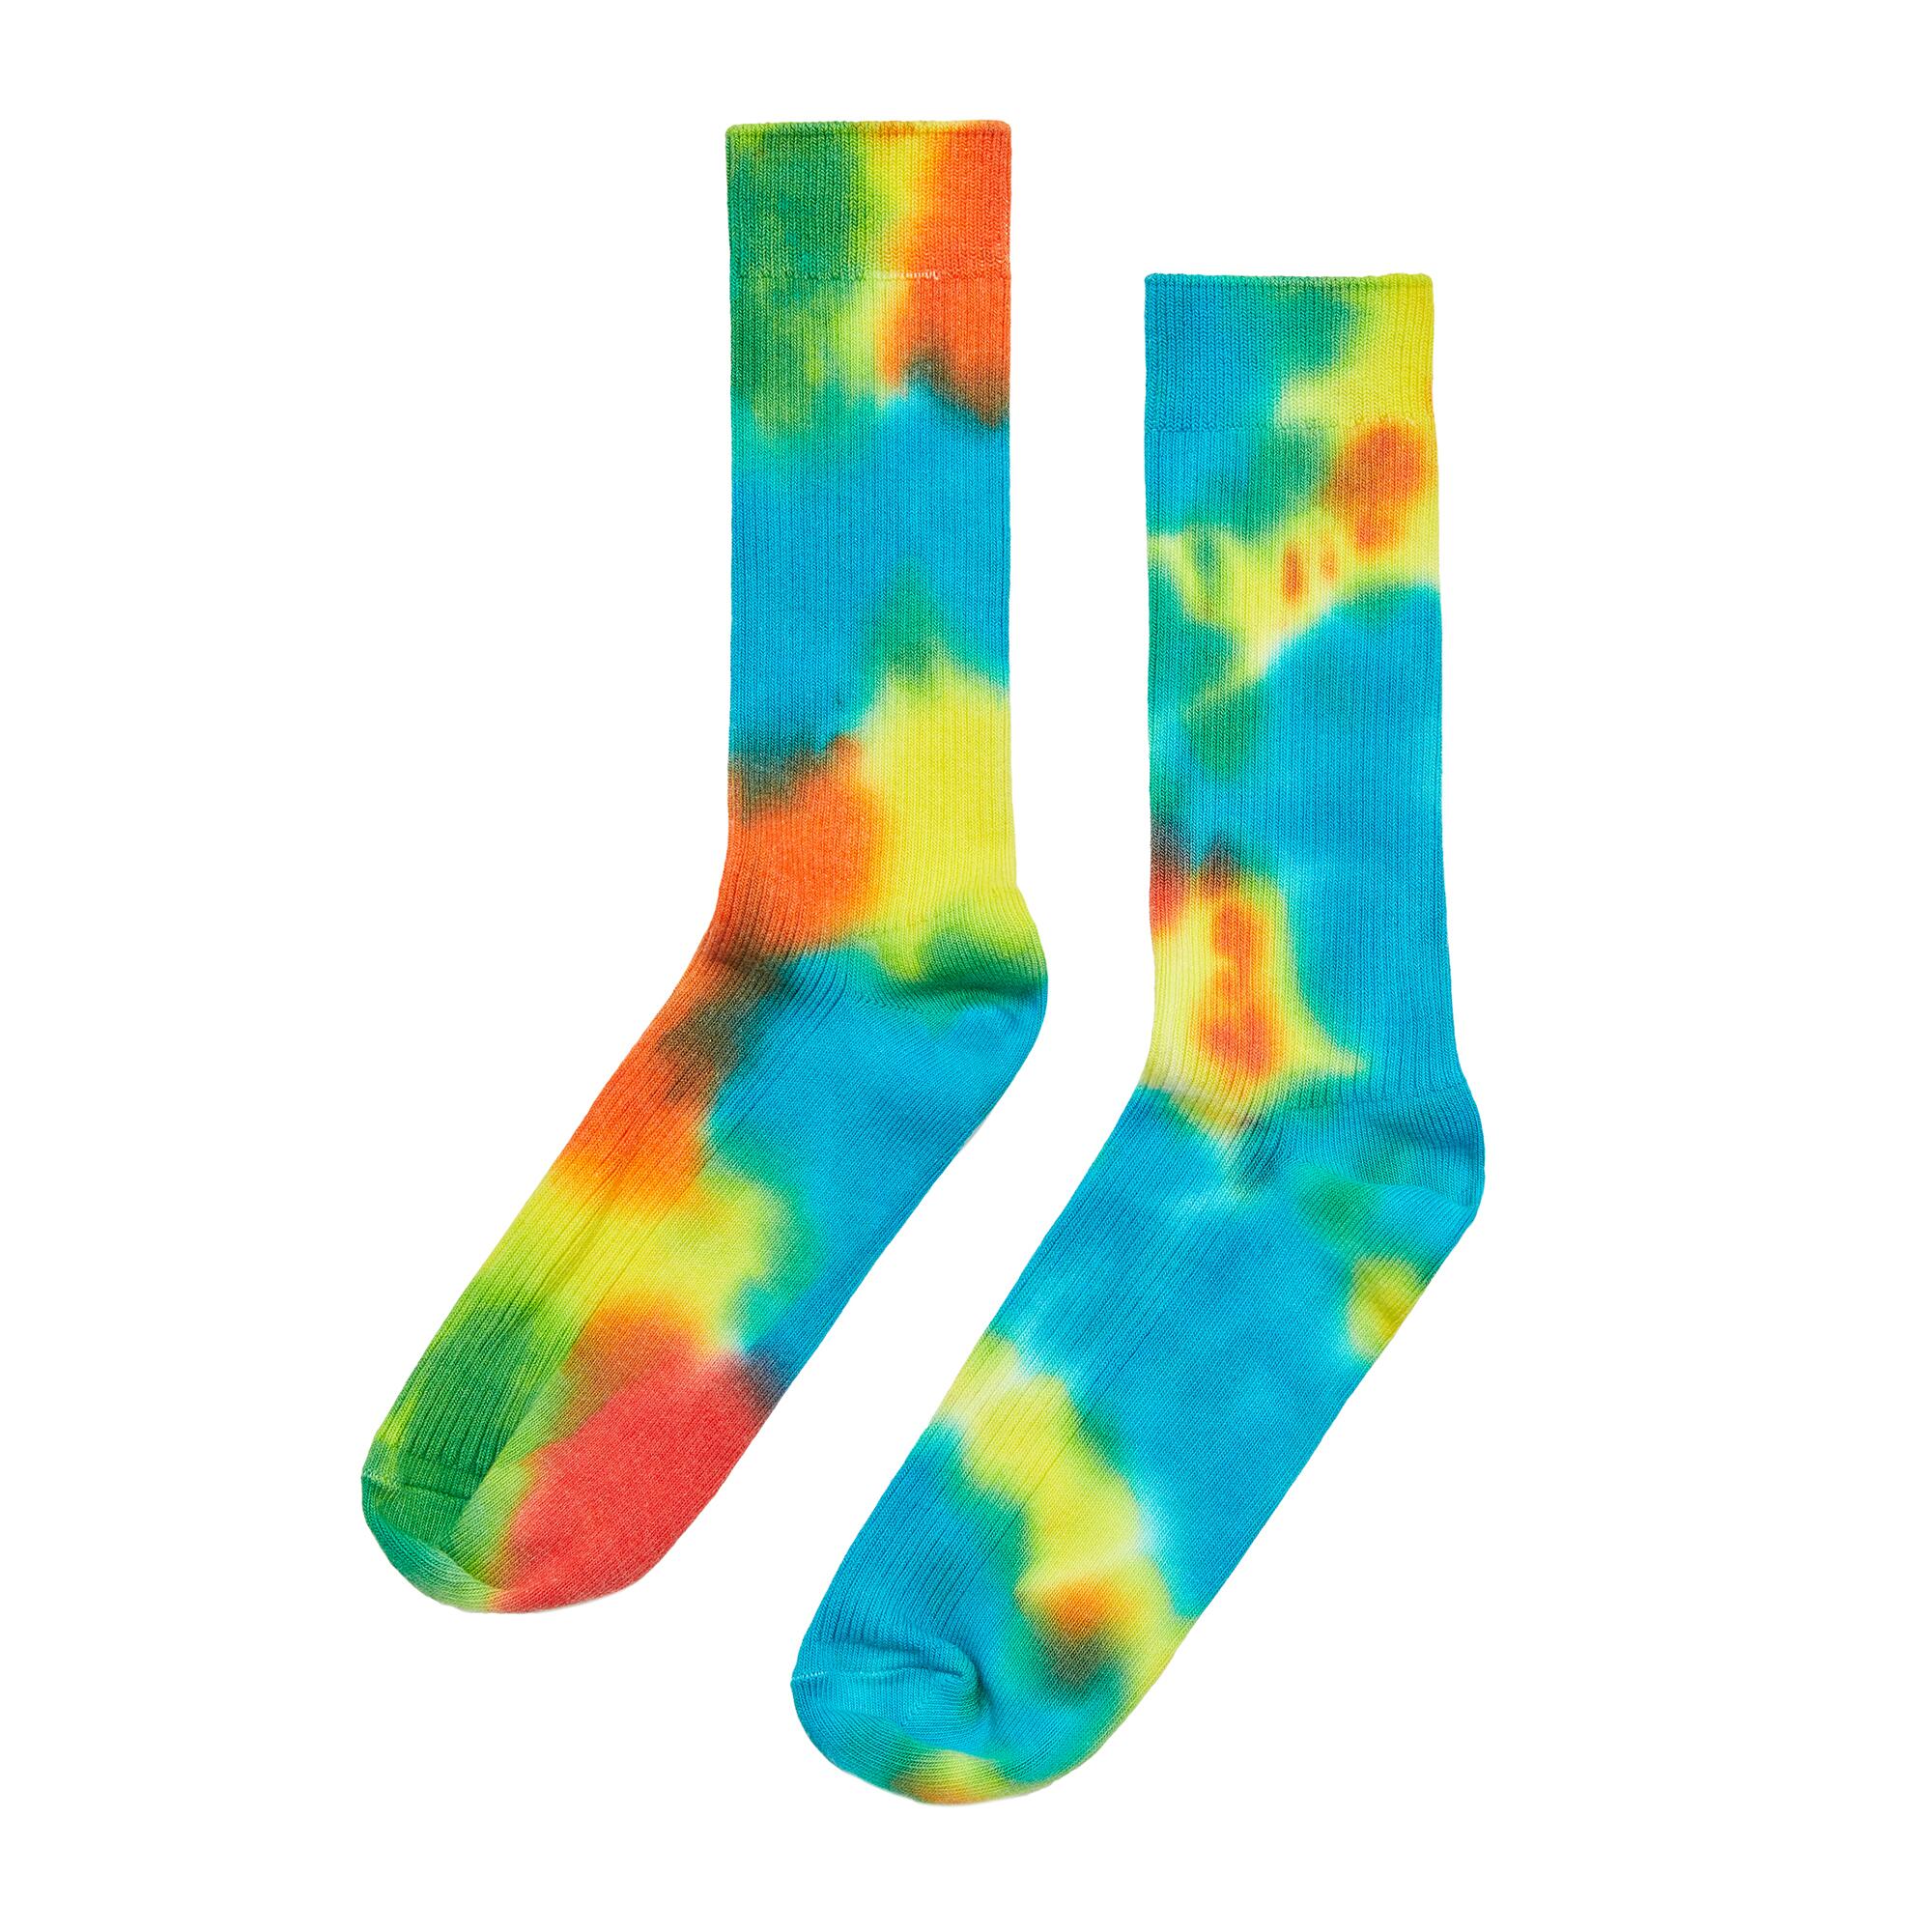 Locally-made tie-dye socks from Cotton Citizen